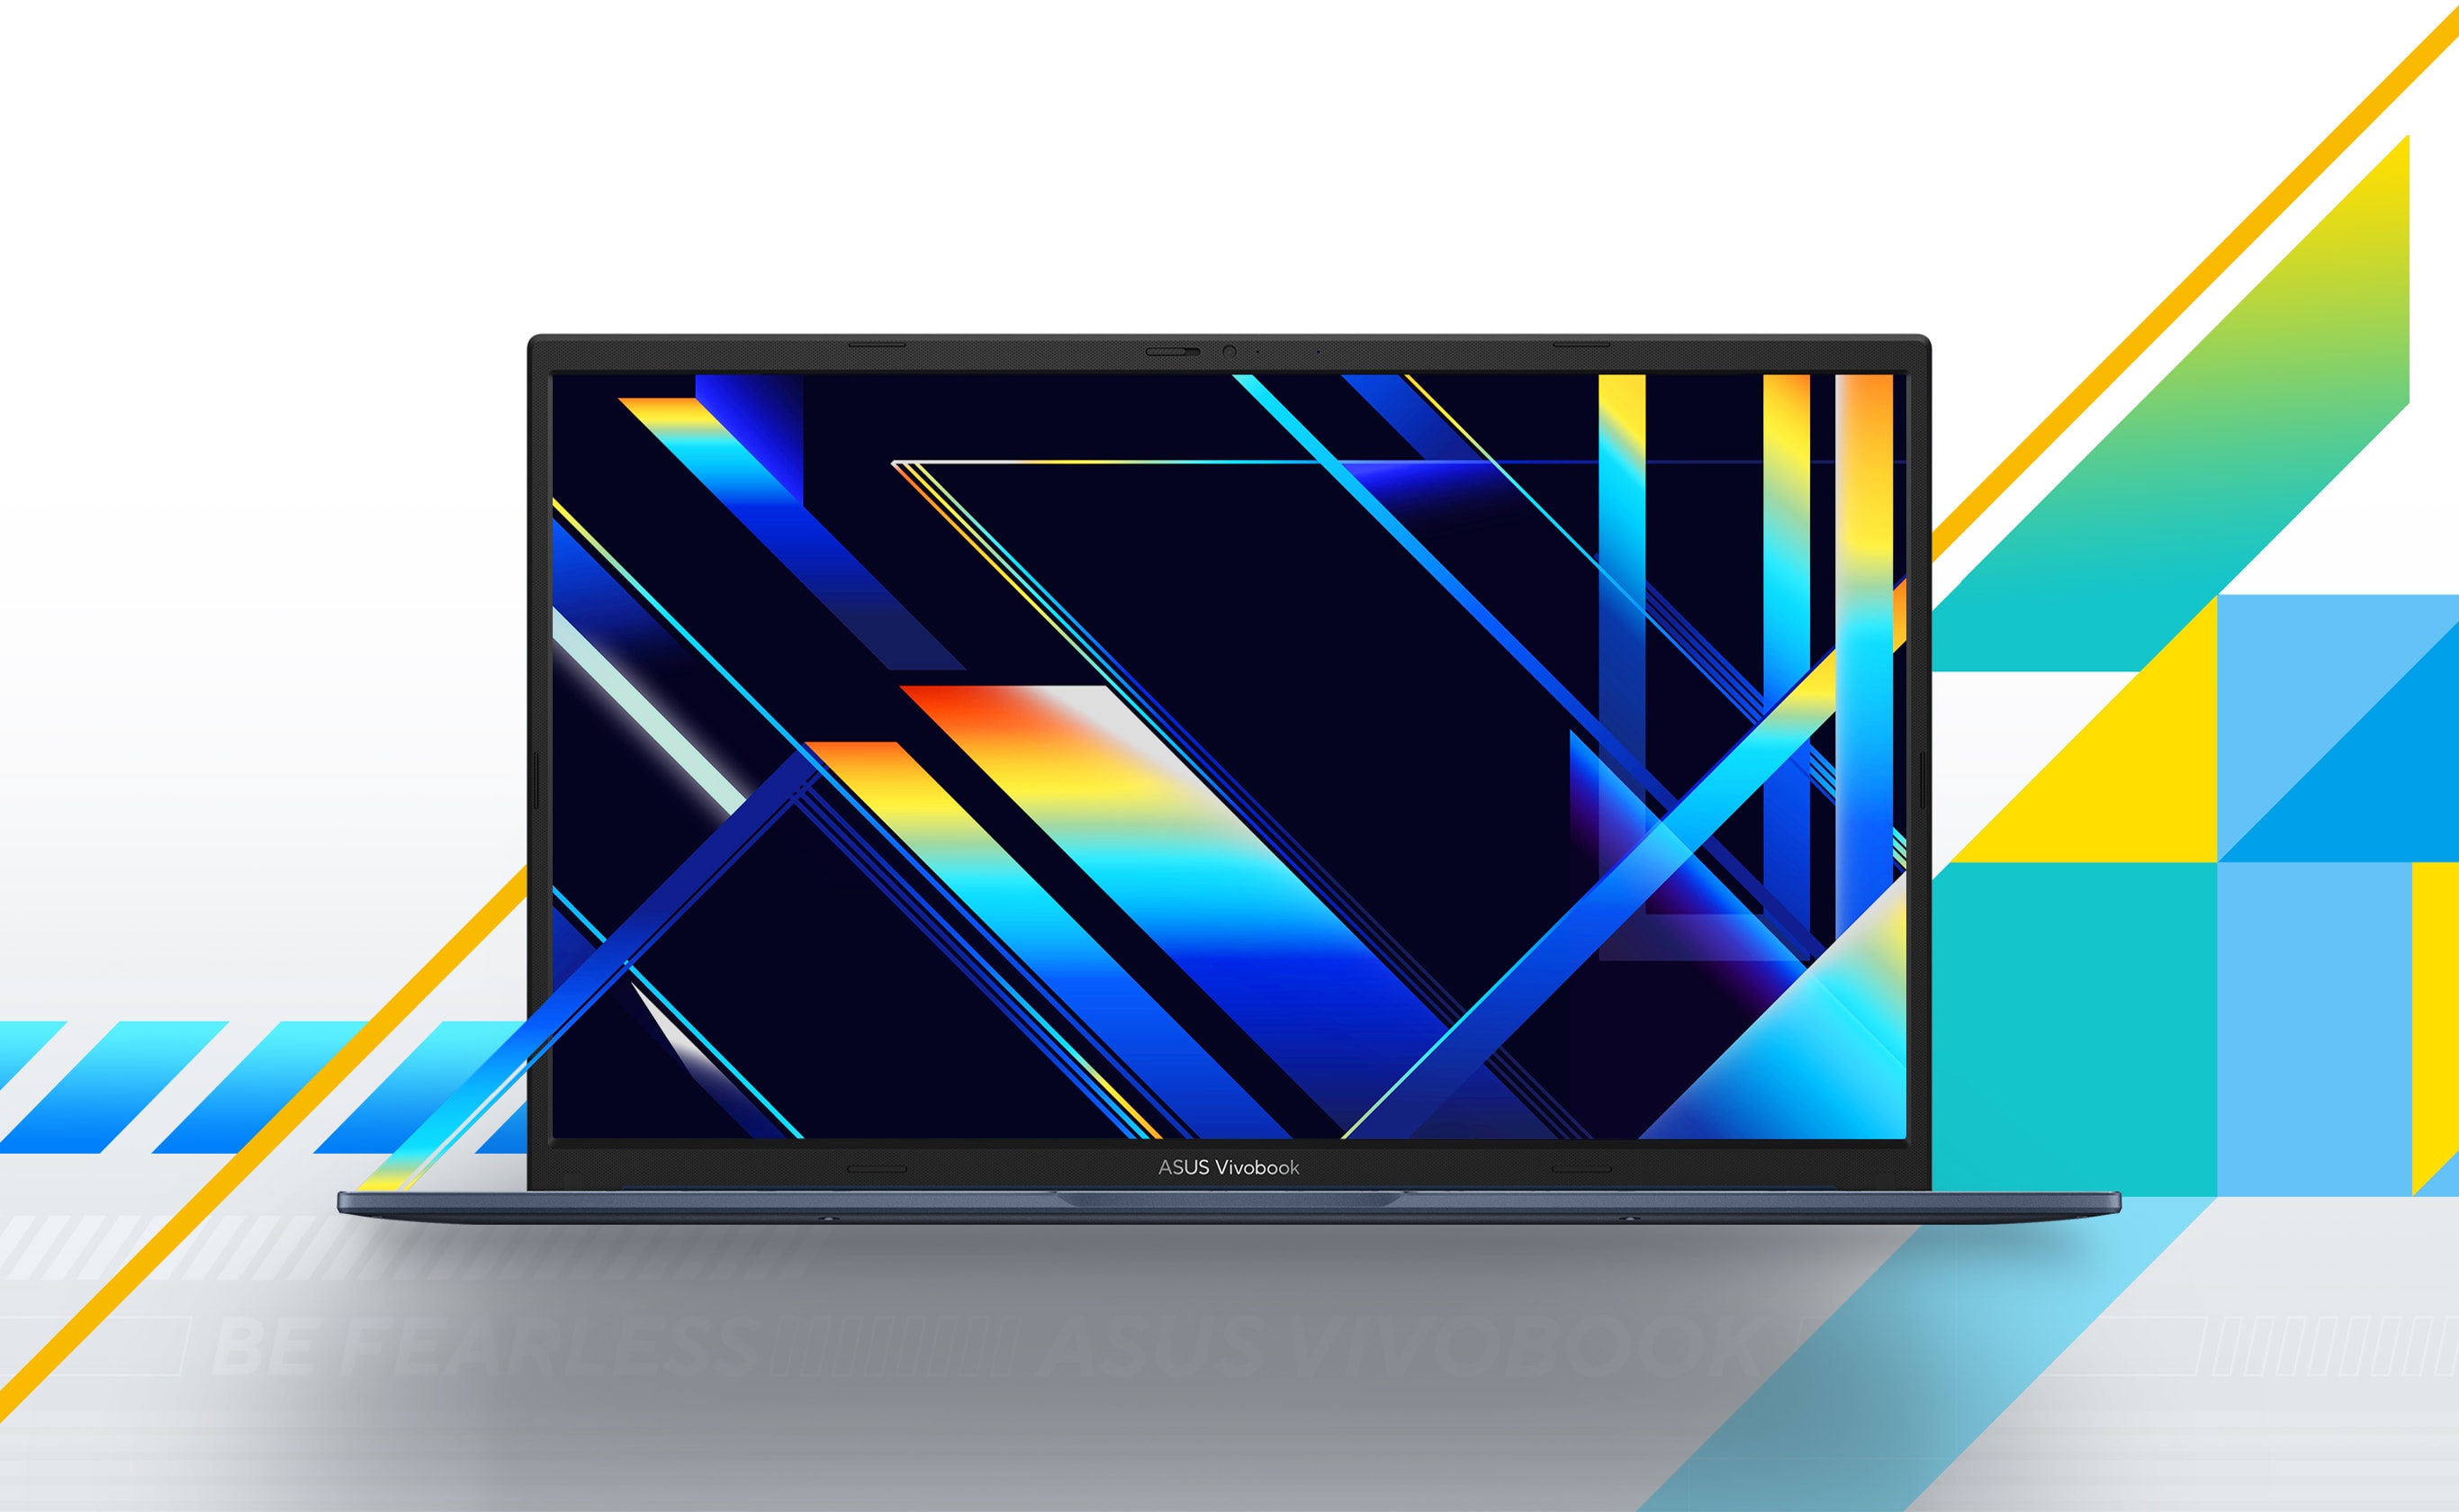 Vivobook 17 delivers beautifully clear visuals with its three-sided slim-bezel NanoEdge display. The wide viewing angles maintain great quality even for off-center viewing, and the TÜV Rheinland eye-care certification ensures low blue-light levels that reduce the risk of eye strain during long viewing sessions. 